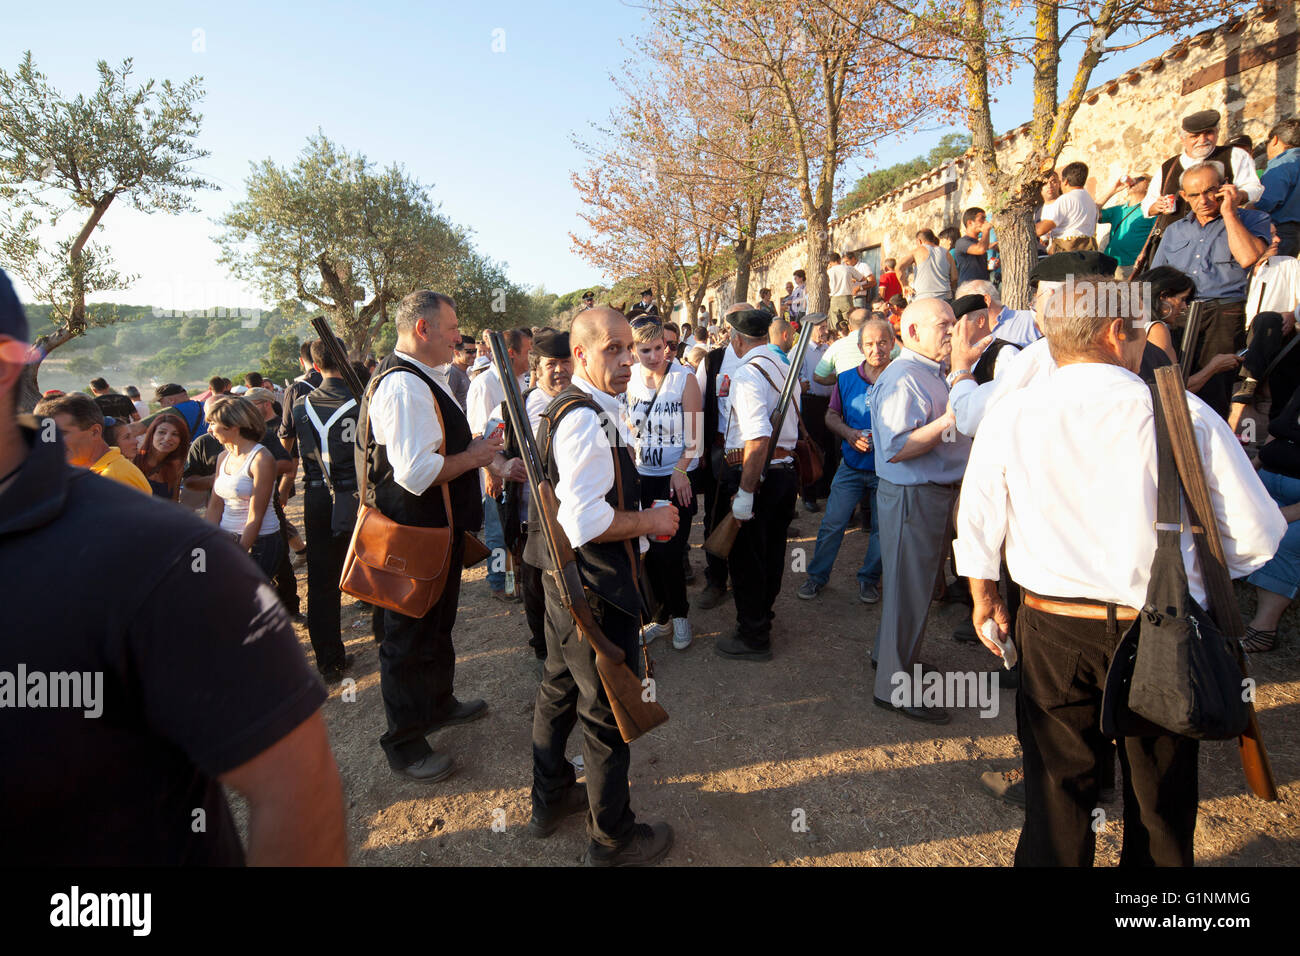 Traditional annual horse race in Sedilo, Sardinia, with a religious background on July 6th 2012. Stock Photo